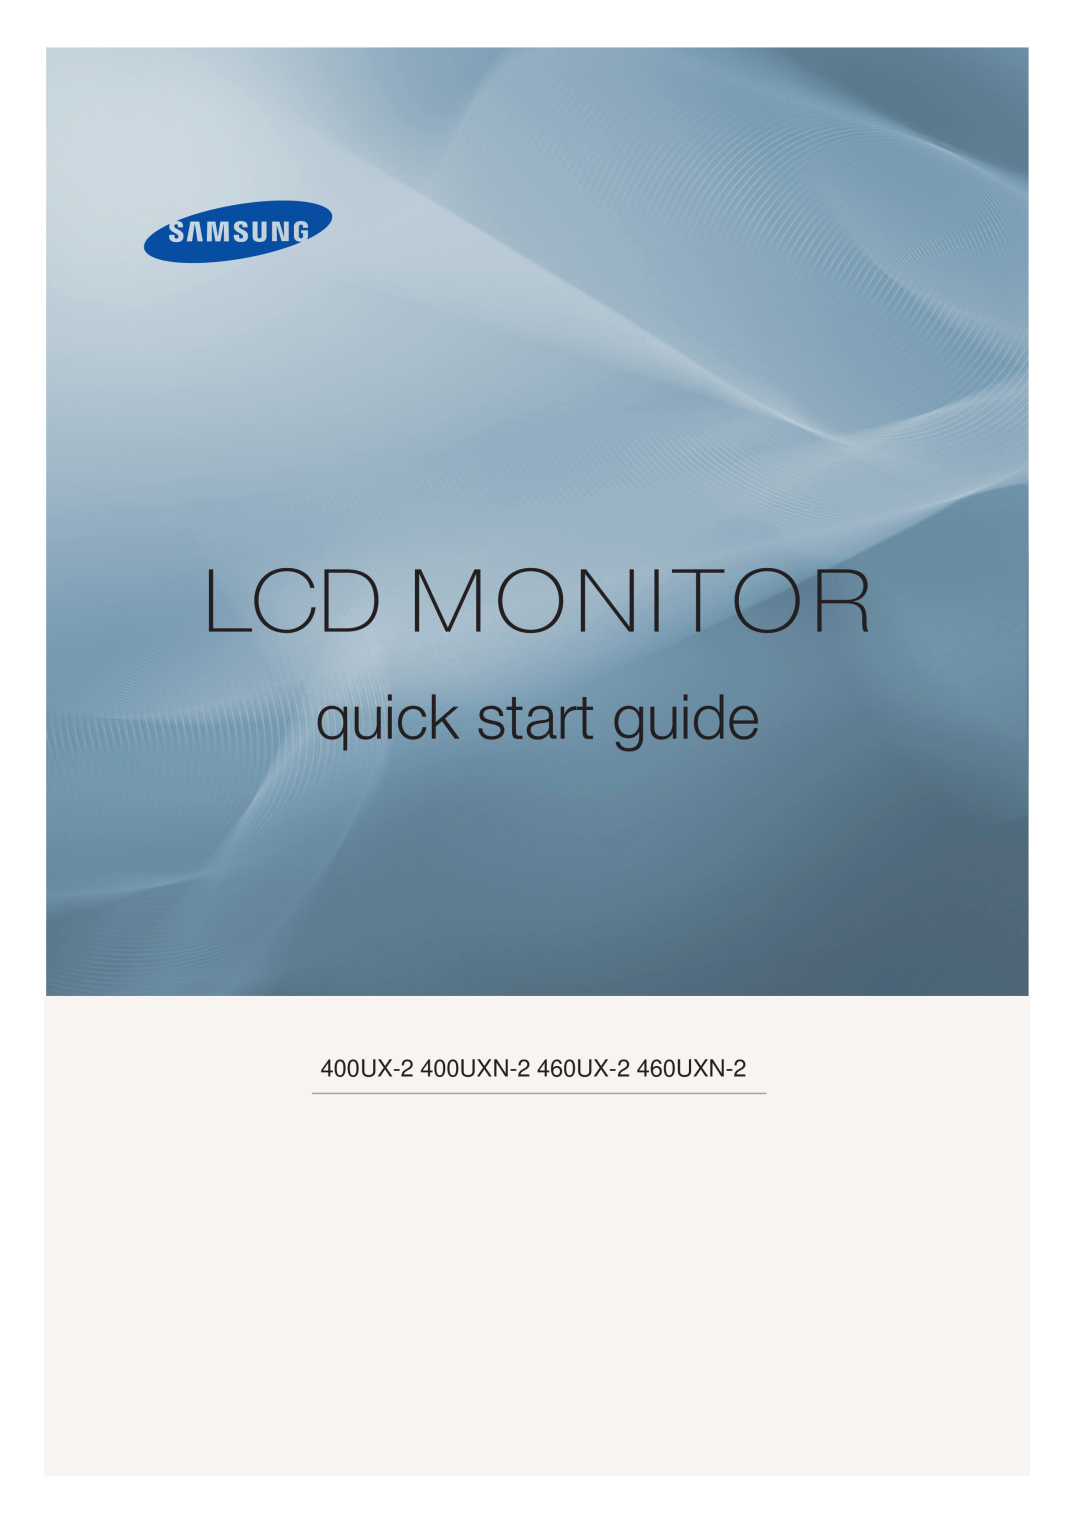 Samsung 725D quick start Lcd Monitor, quick start guide, 400UX-2 400UXN-2 460UX-2 460UXN-2 